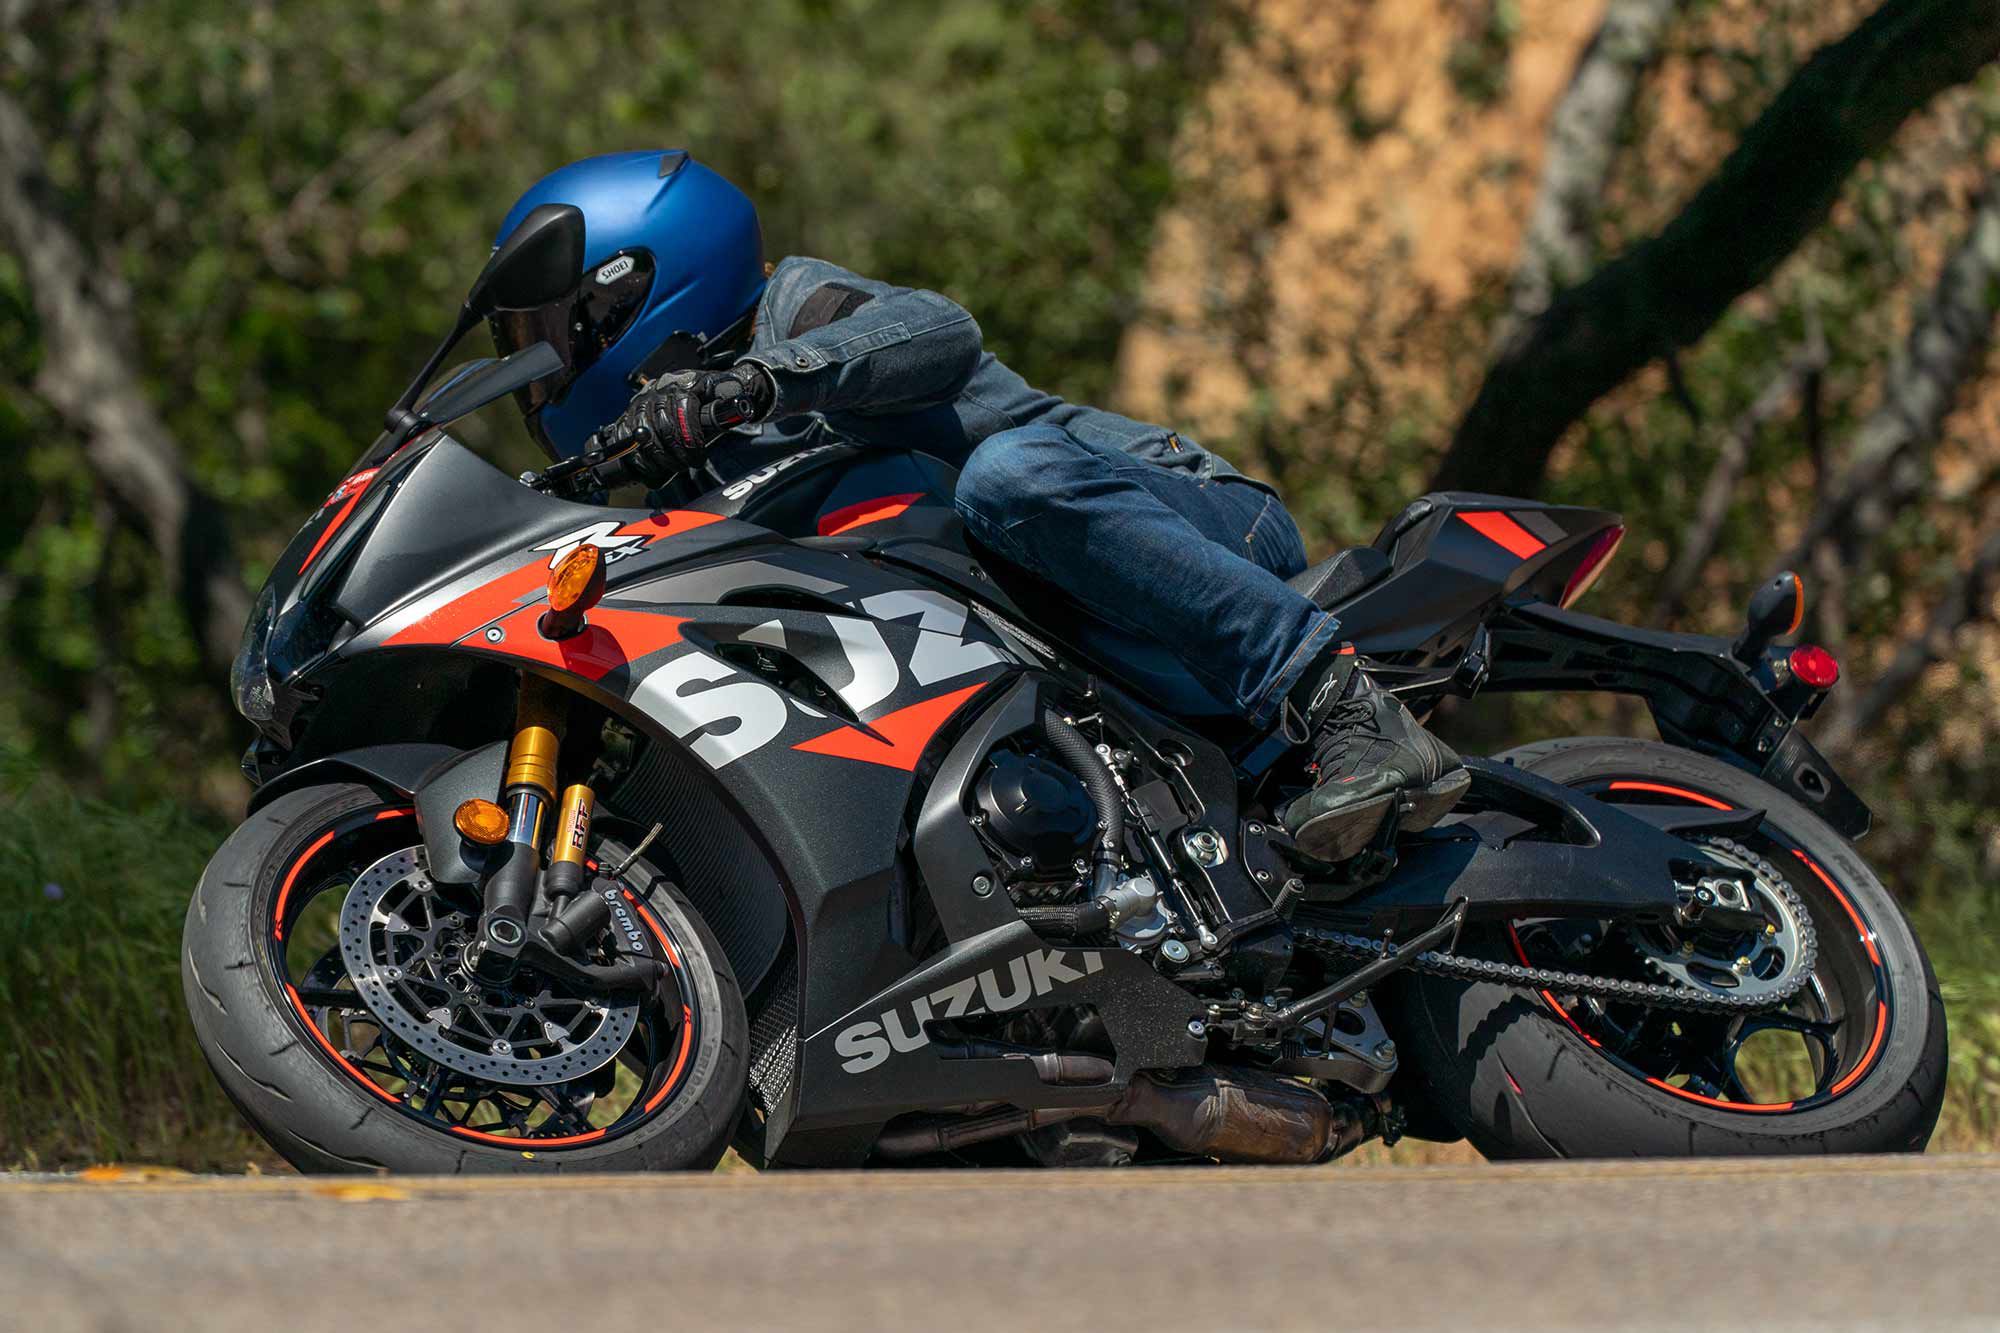 Suzuki offers plenty of bang for the buck with its up-spec GSX-R1000R superbike ($17,749).